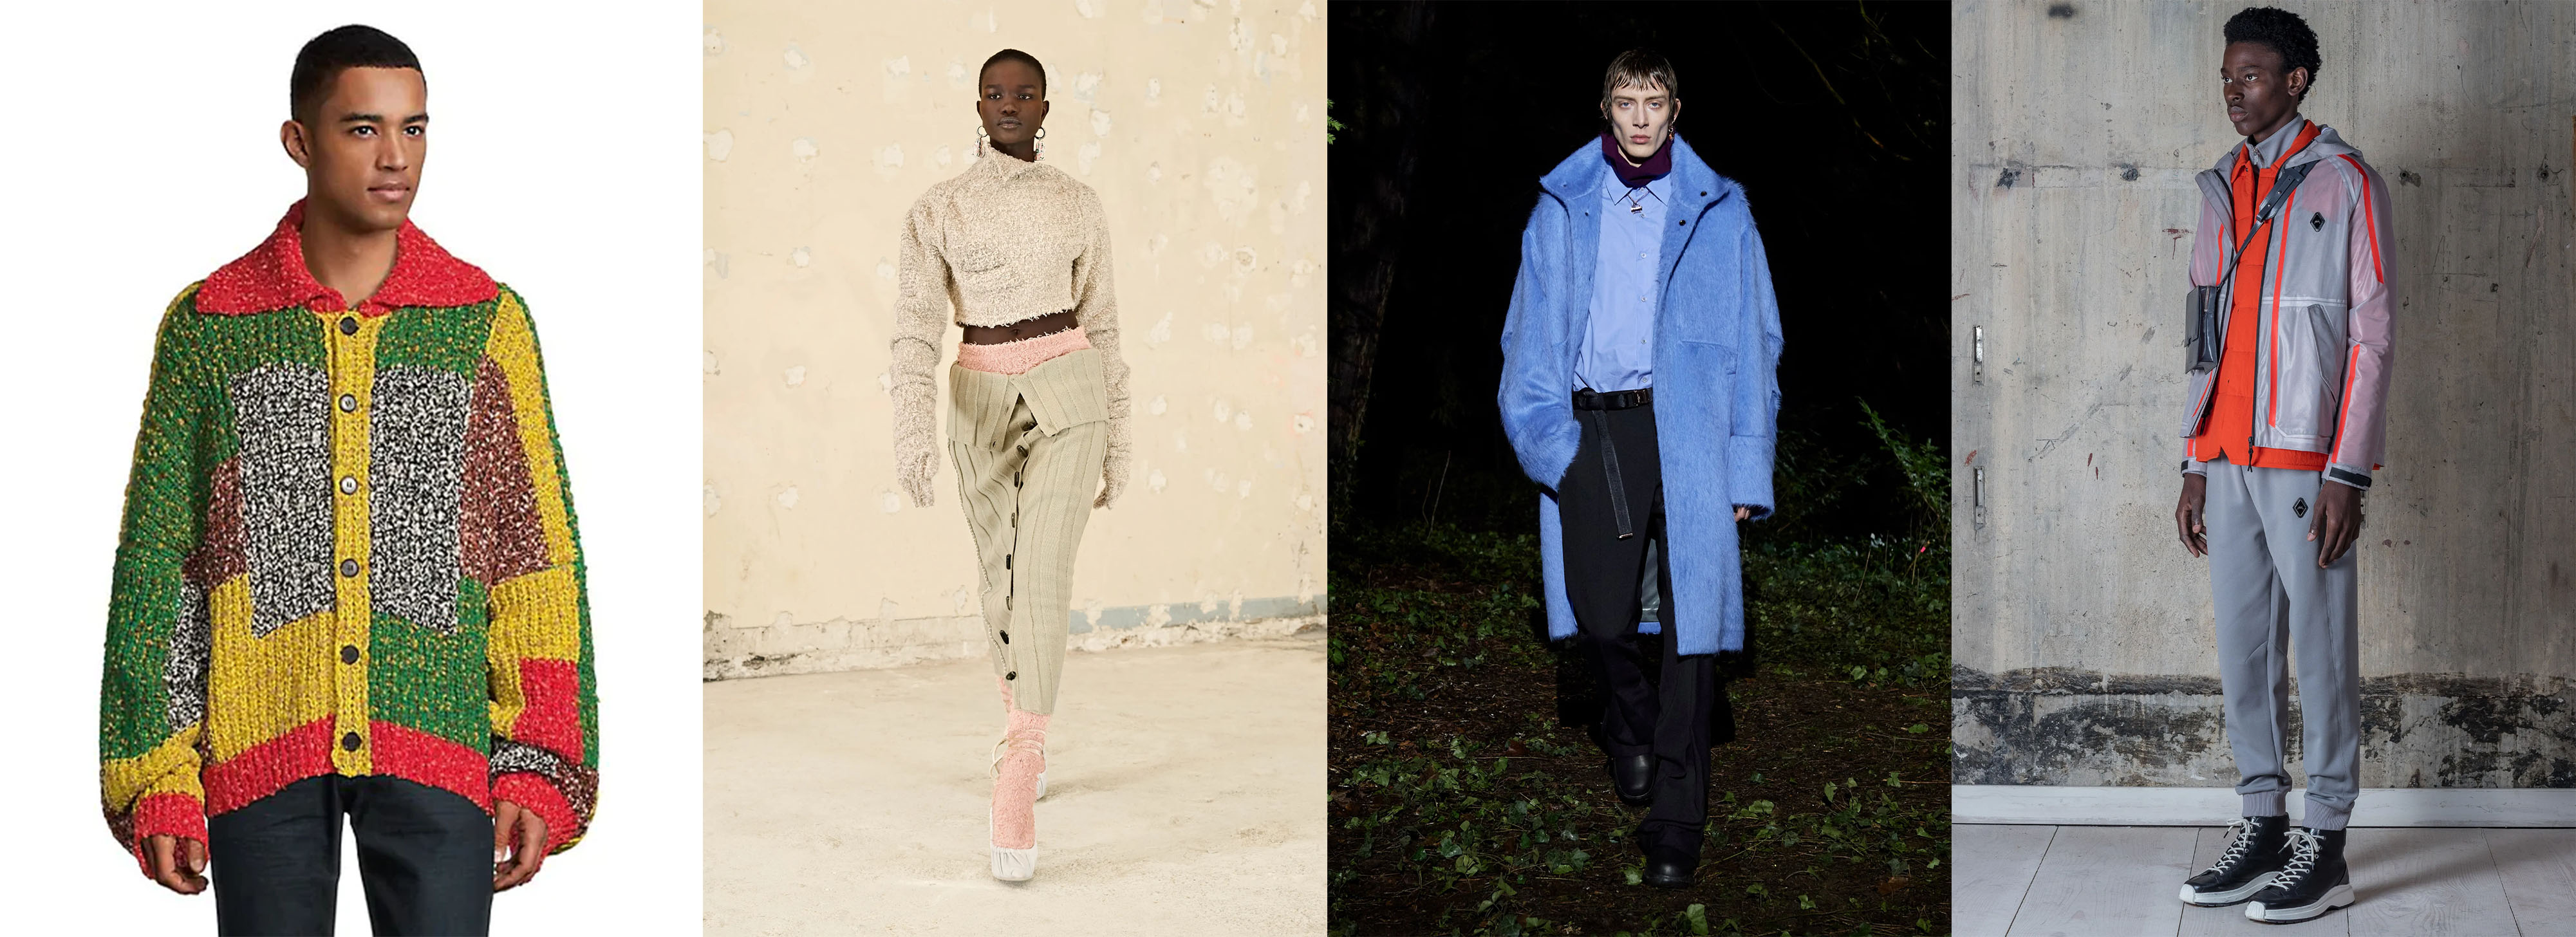 SoleStyle: Fall/Winter '21 Trend Report